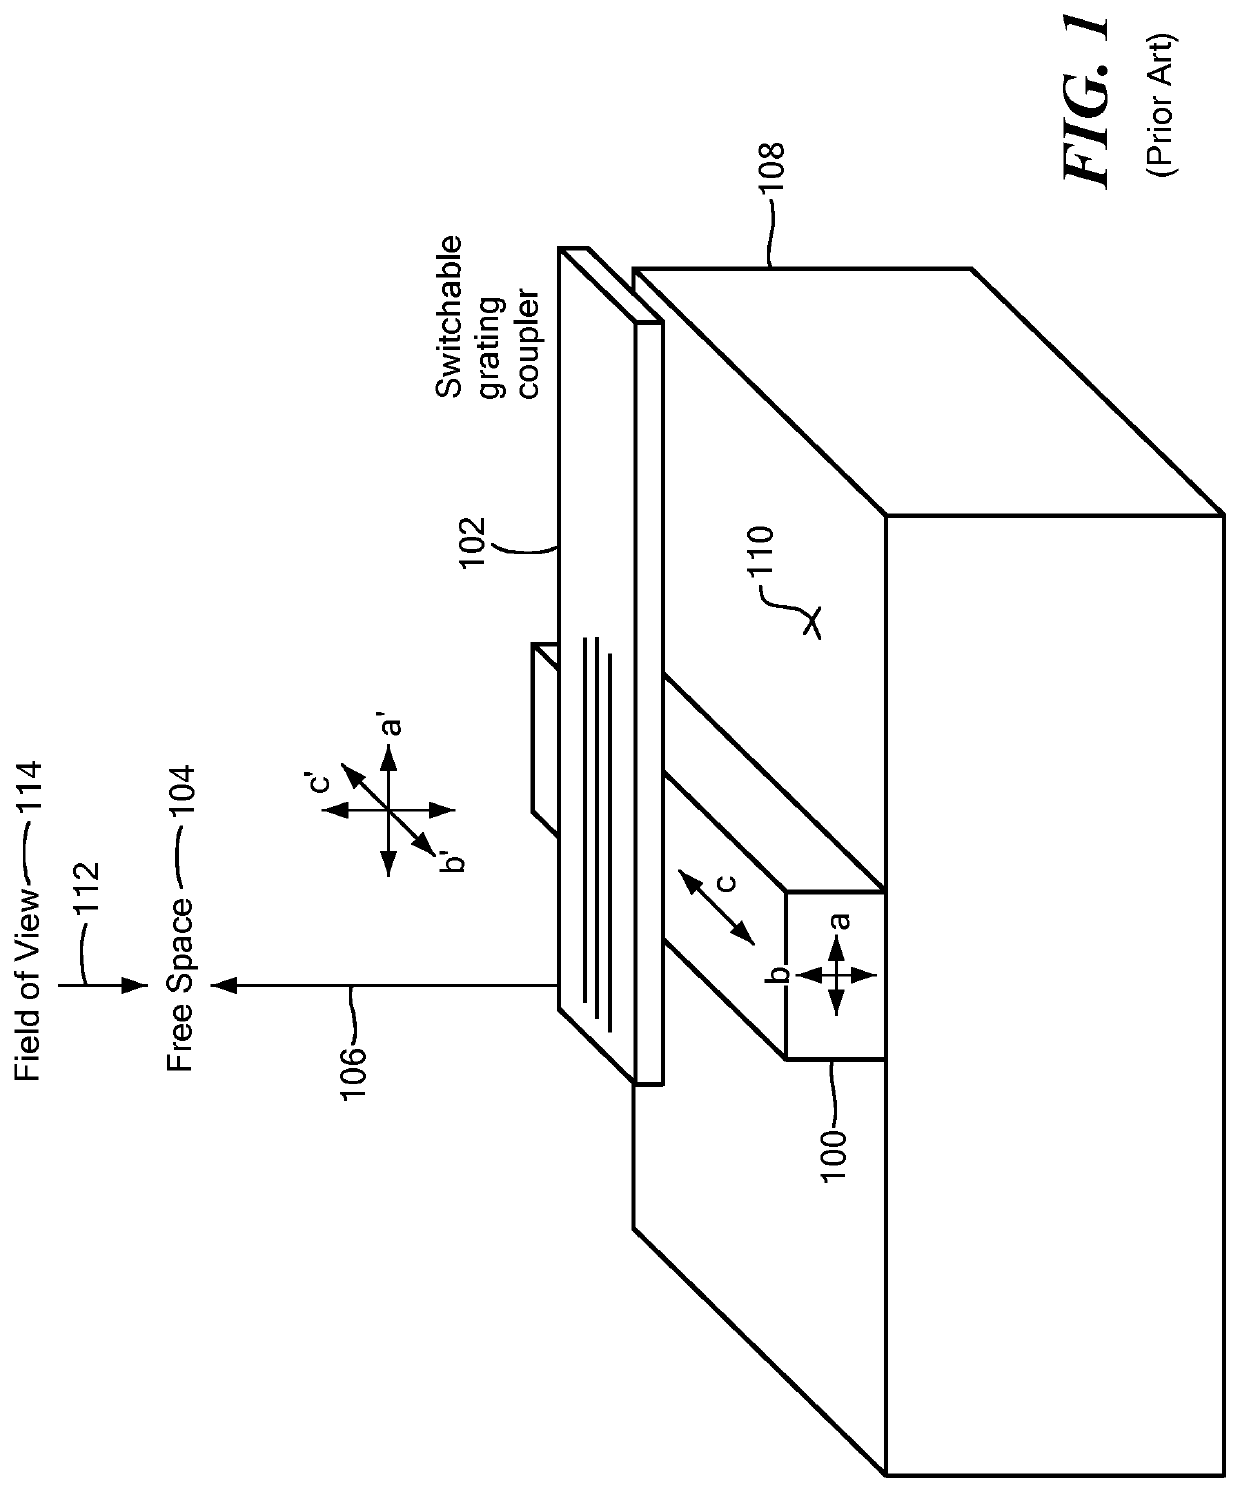 Dual-Polarization LiDAR Systems and Methods